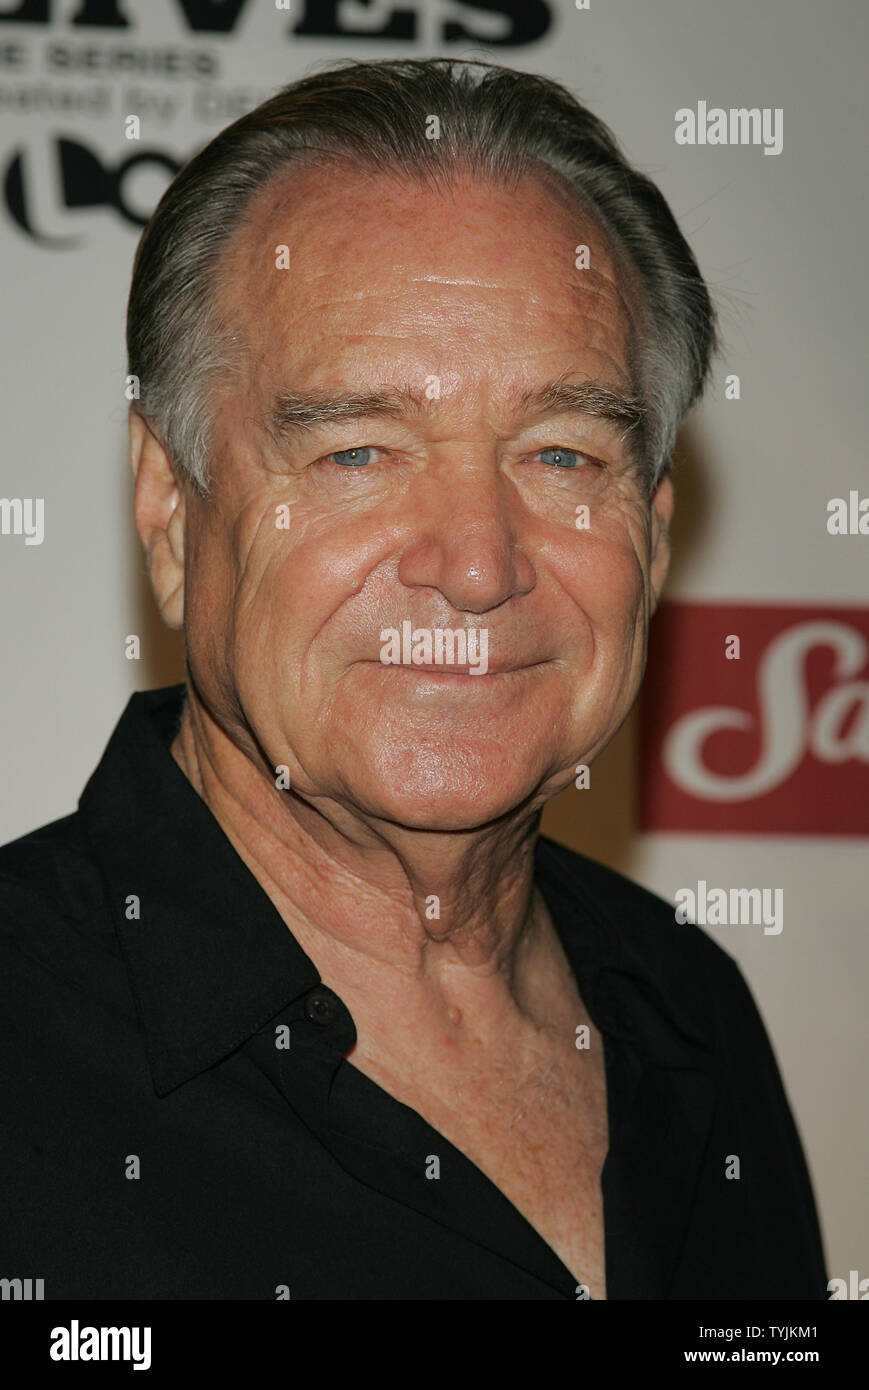 Newell Alexander arrives for the world premiere of 'Sordid Lives: The Series' at the New World Stages in New York on July 15, 2008.   (UPI Photo/Laura Cavanaugh) Stock Photo